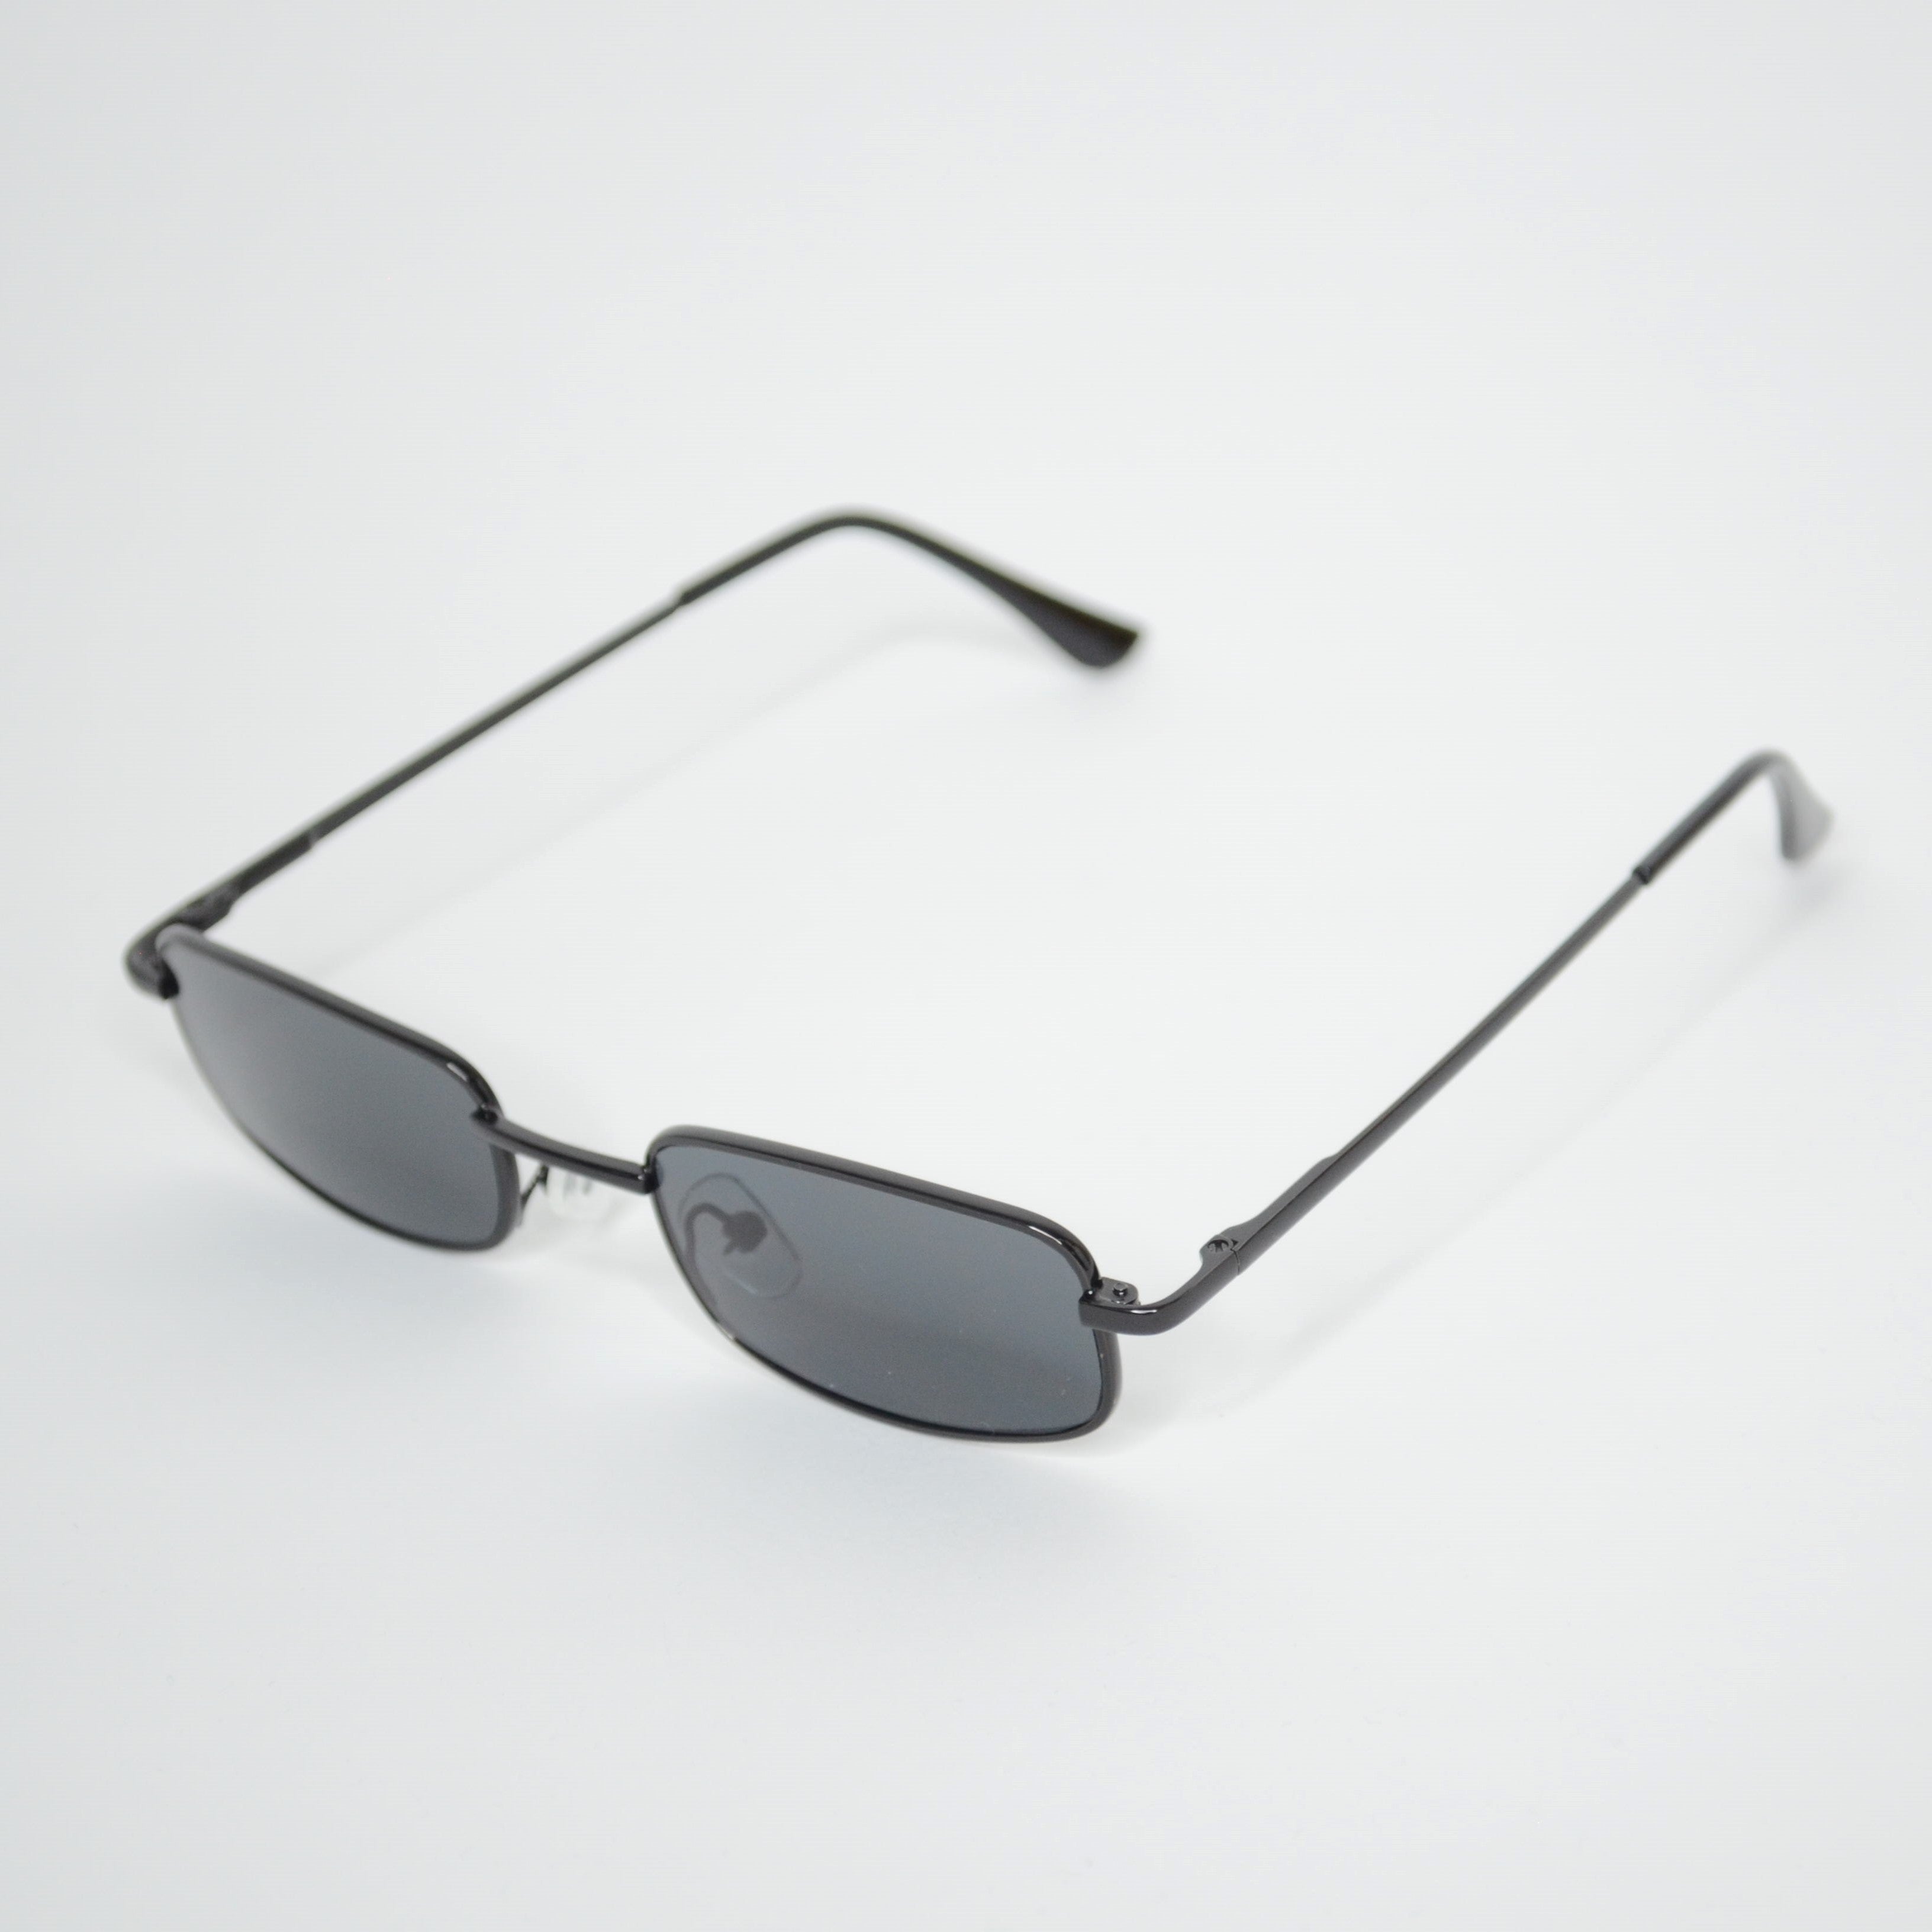 2021 stainless steel small square sunglasses| Alibaba.com